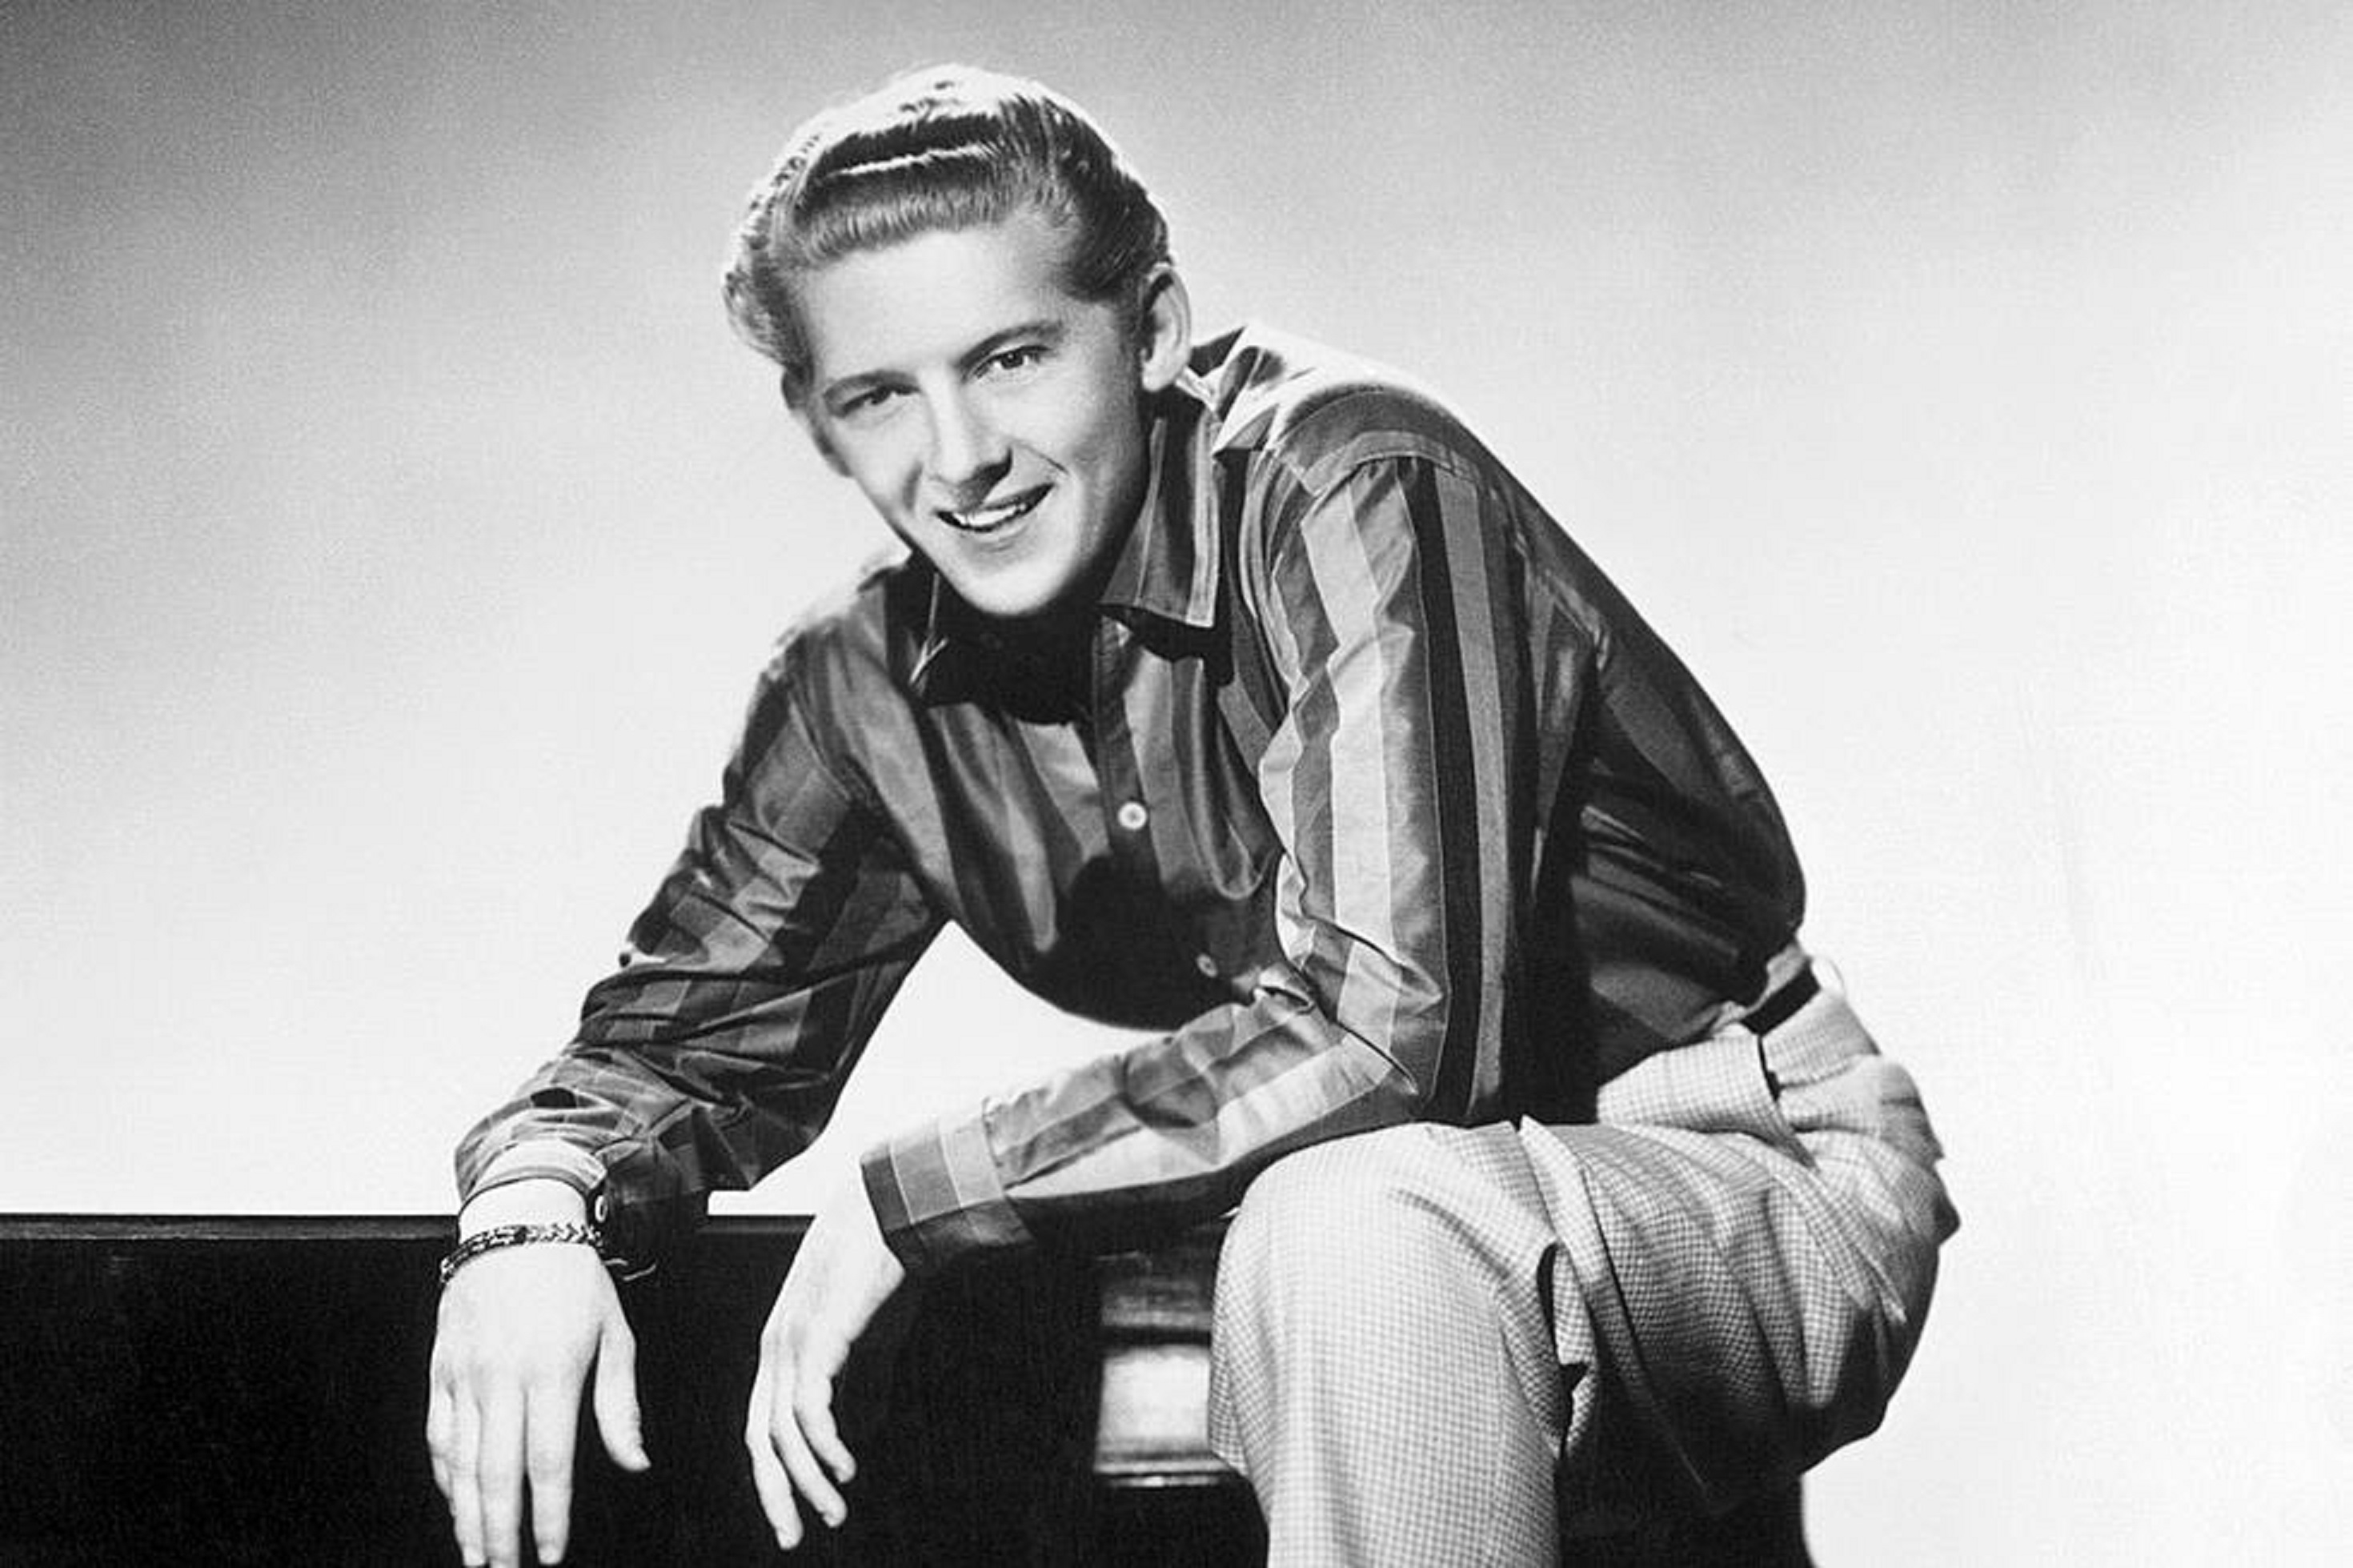 Friends and Colleagues Remember Rock and Country Music Pioneer Jerry Lee Lewis 'The Killer'